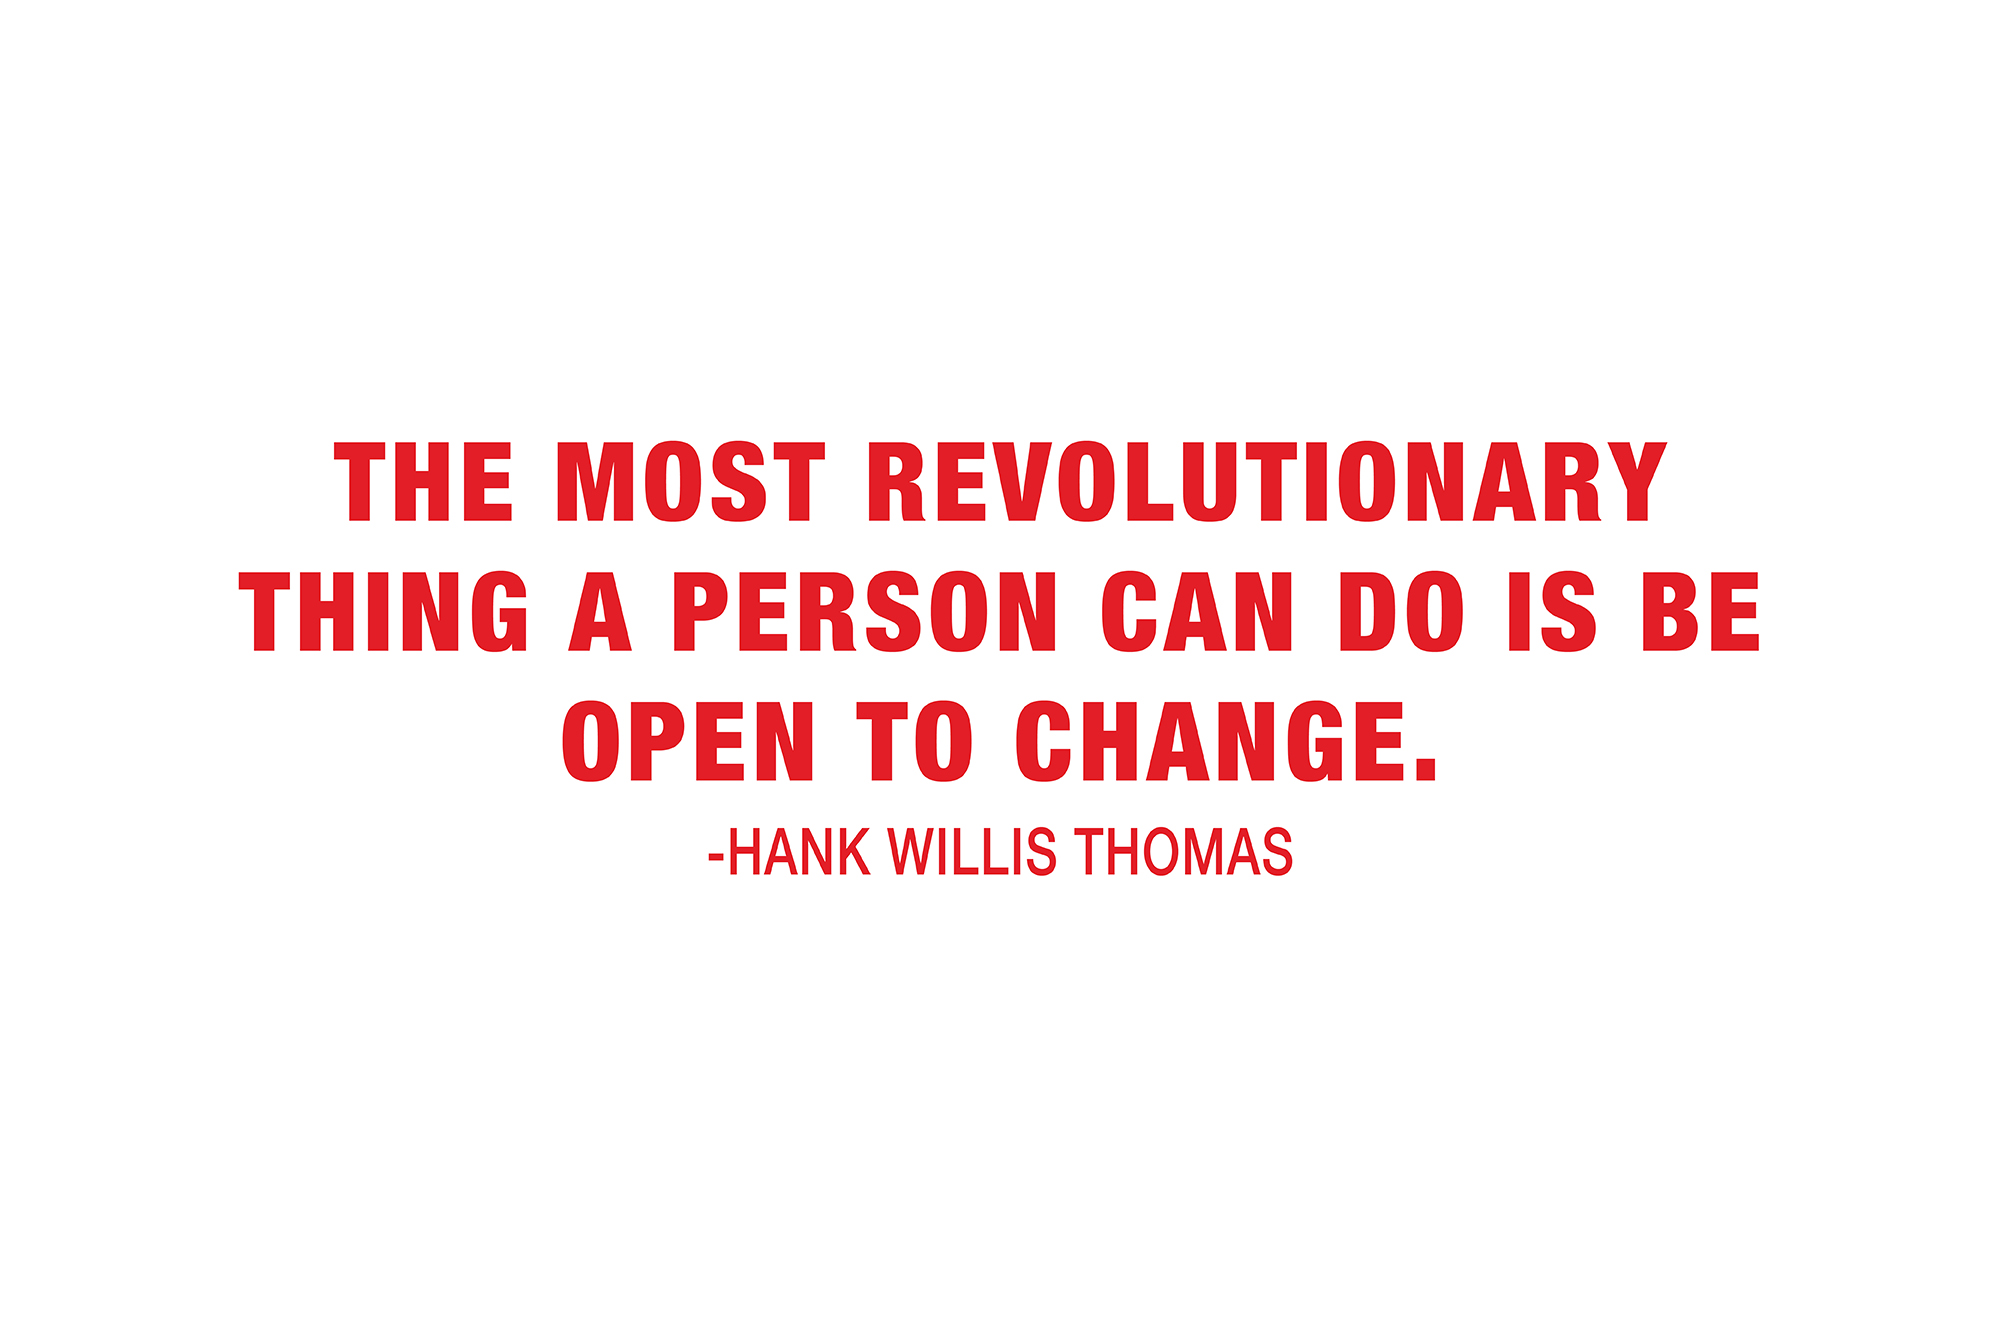 The most revolutionary thing a person can do is be open to change, Hank Willis Thomas